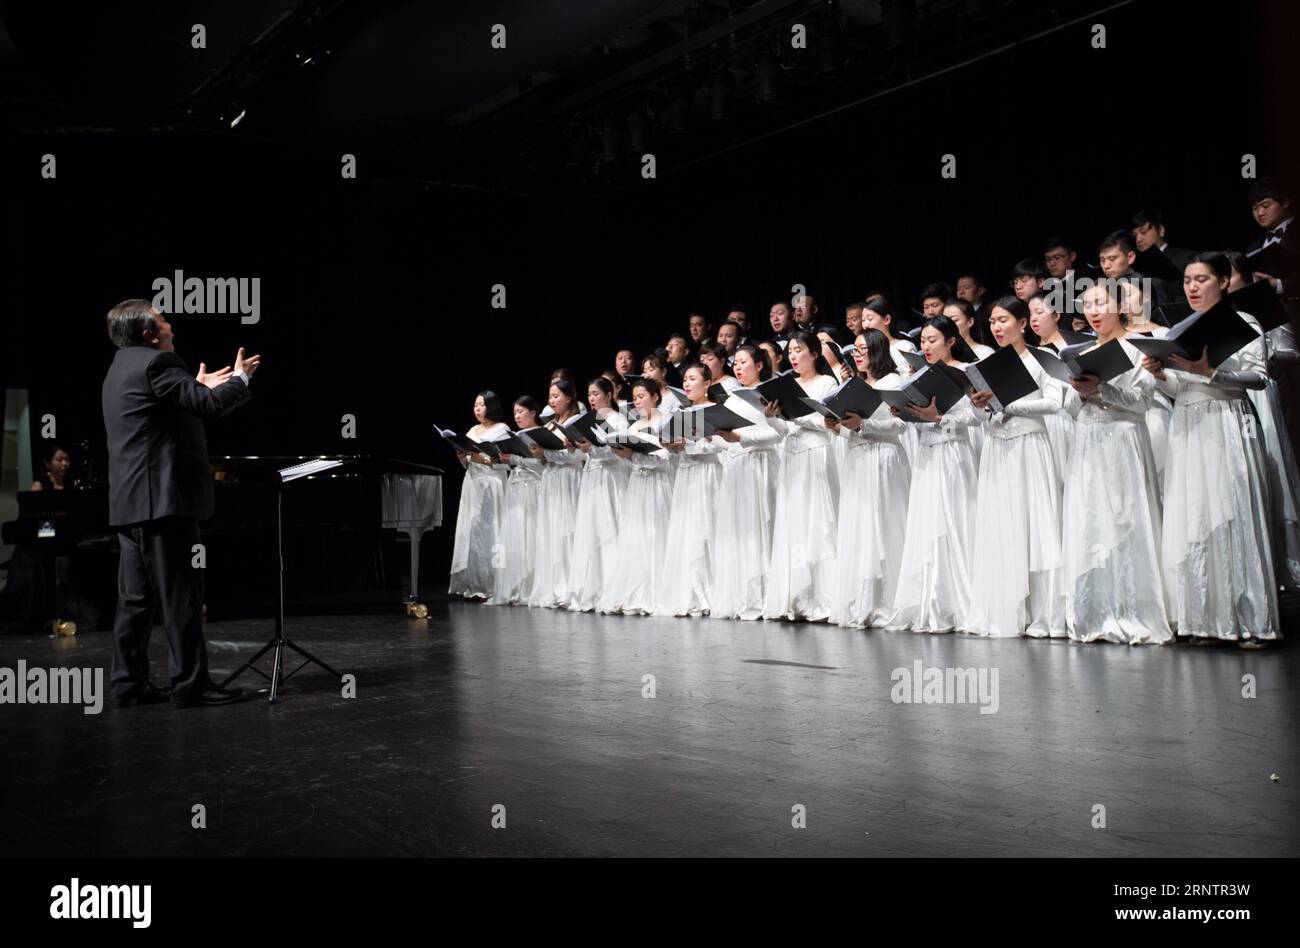 (171115) -- GENEVA, Nov. 15, 2017 -- The choir of China National Opera House perform at a concert in Saint-Prex, a Swiss town near Lake Leman, on Nov. 15, 2017. China National Opera House held a performance here to promote cultural exchanges between China and Switzerland on Wednesday, attracting hundreds of locals and representatives of international organizations in Geneva. ) SWITZERLAND-SAINT-PREX-CHINA NATIONAL OPERA HOUSE-PERFORMANCE XuxJinquan PUBLICATIONxNOTxINxCHN Stock Photo